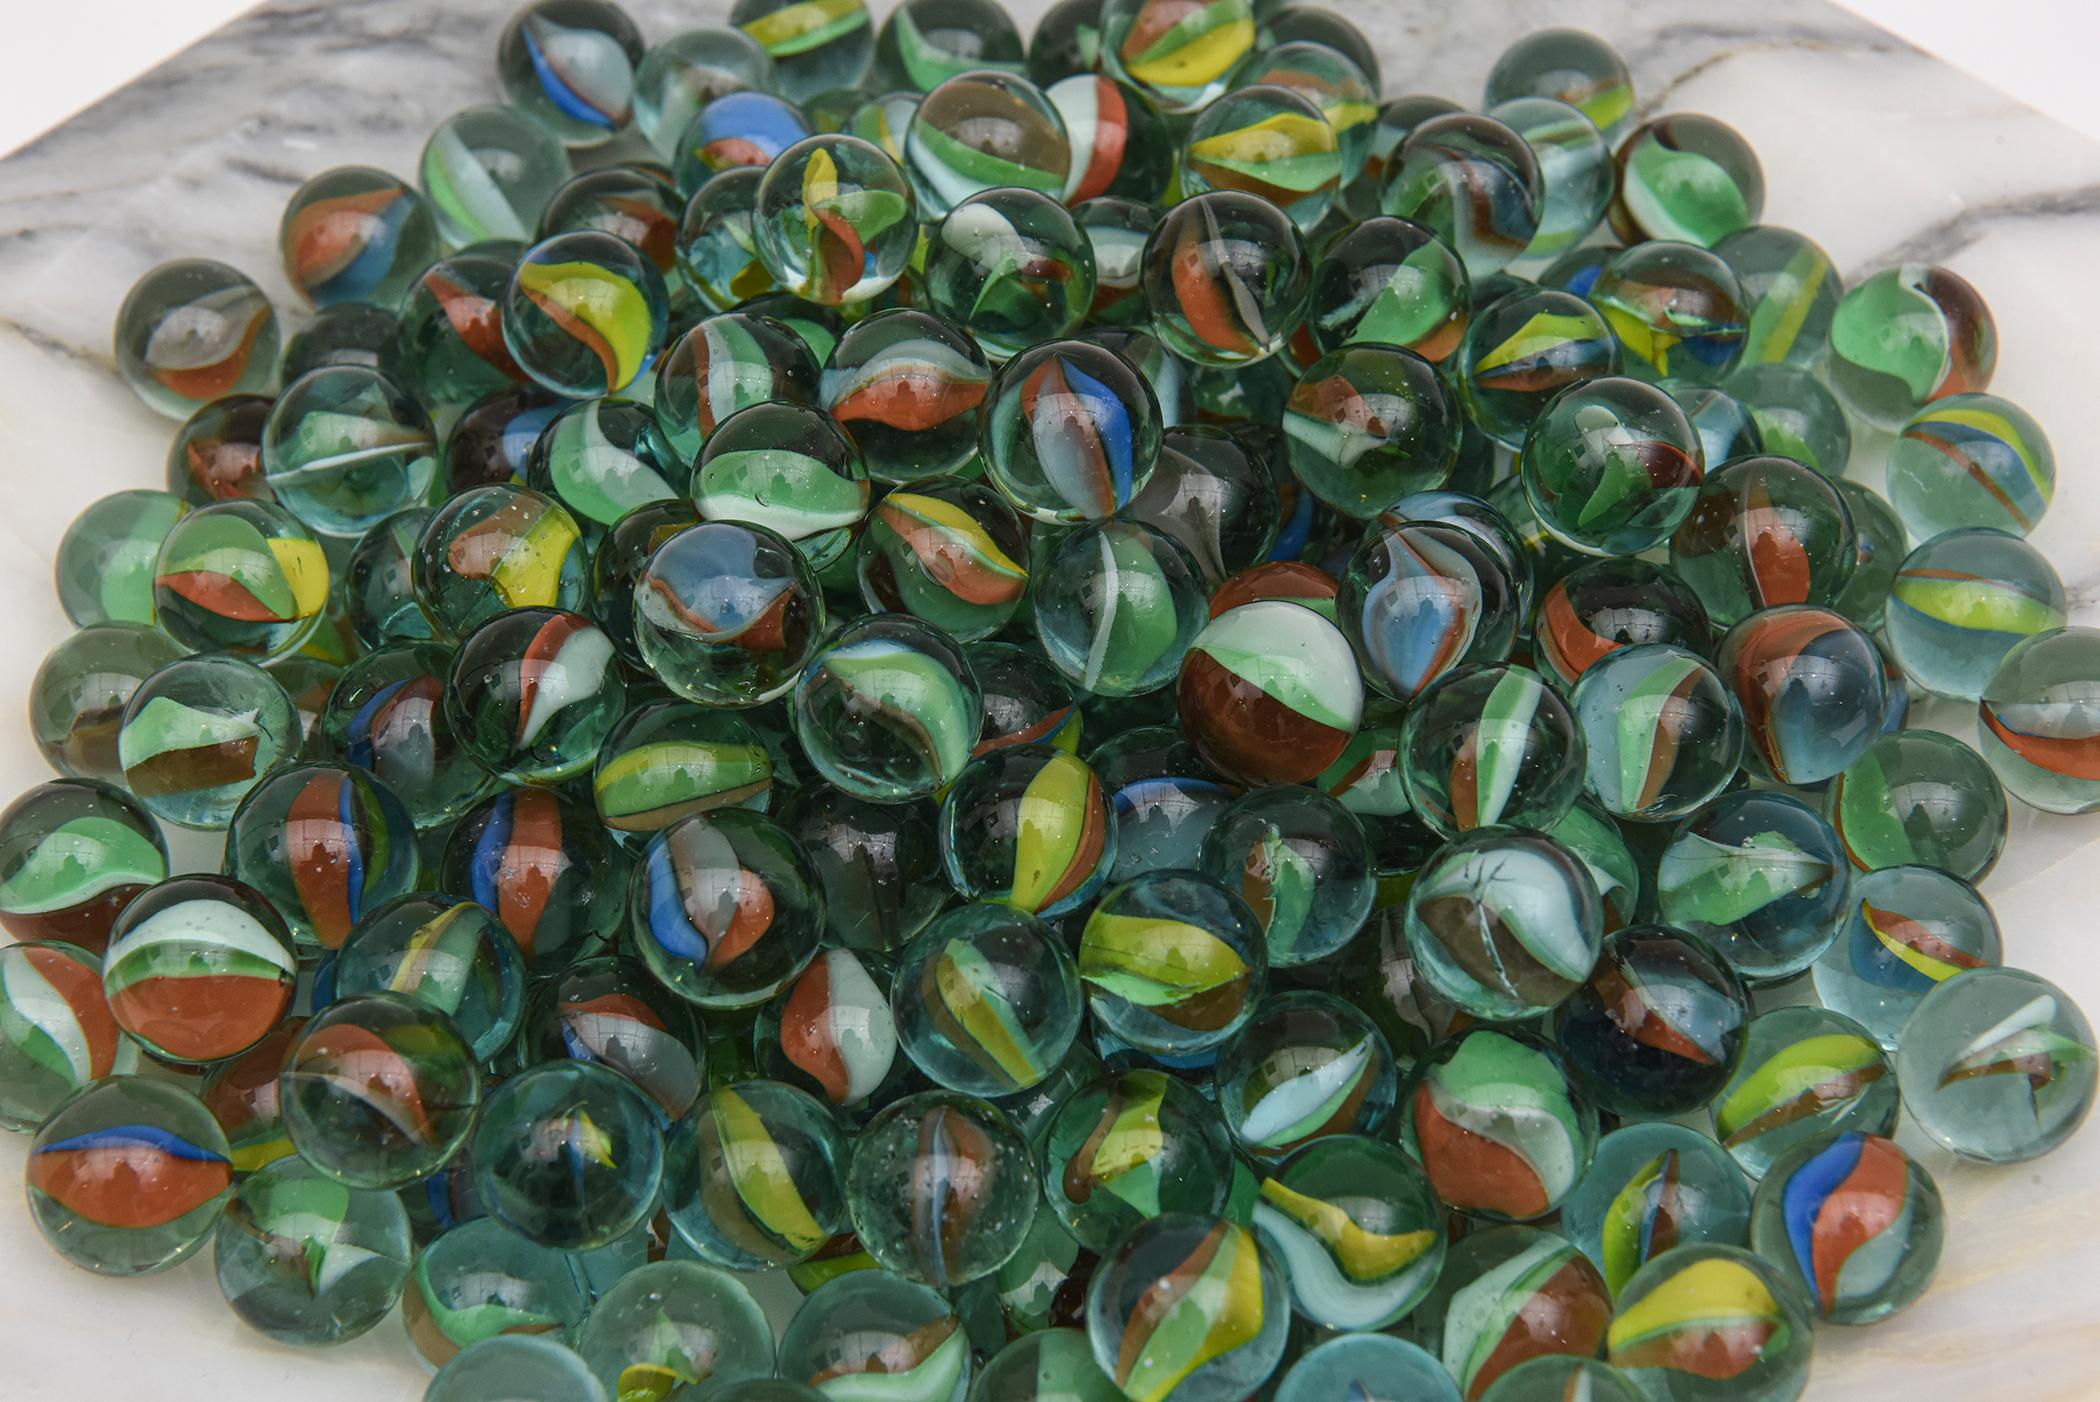  Cats Eye Glass Marbles Collection of 234 Mid Century Modern 2